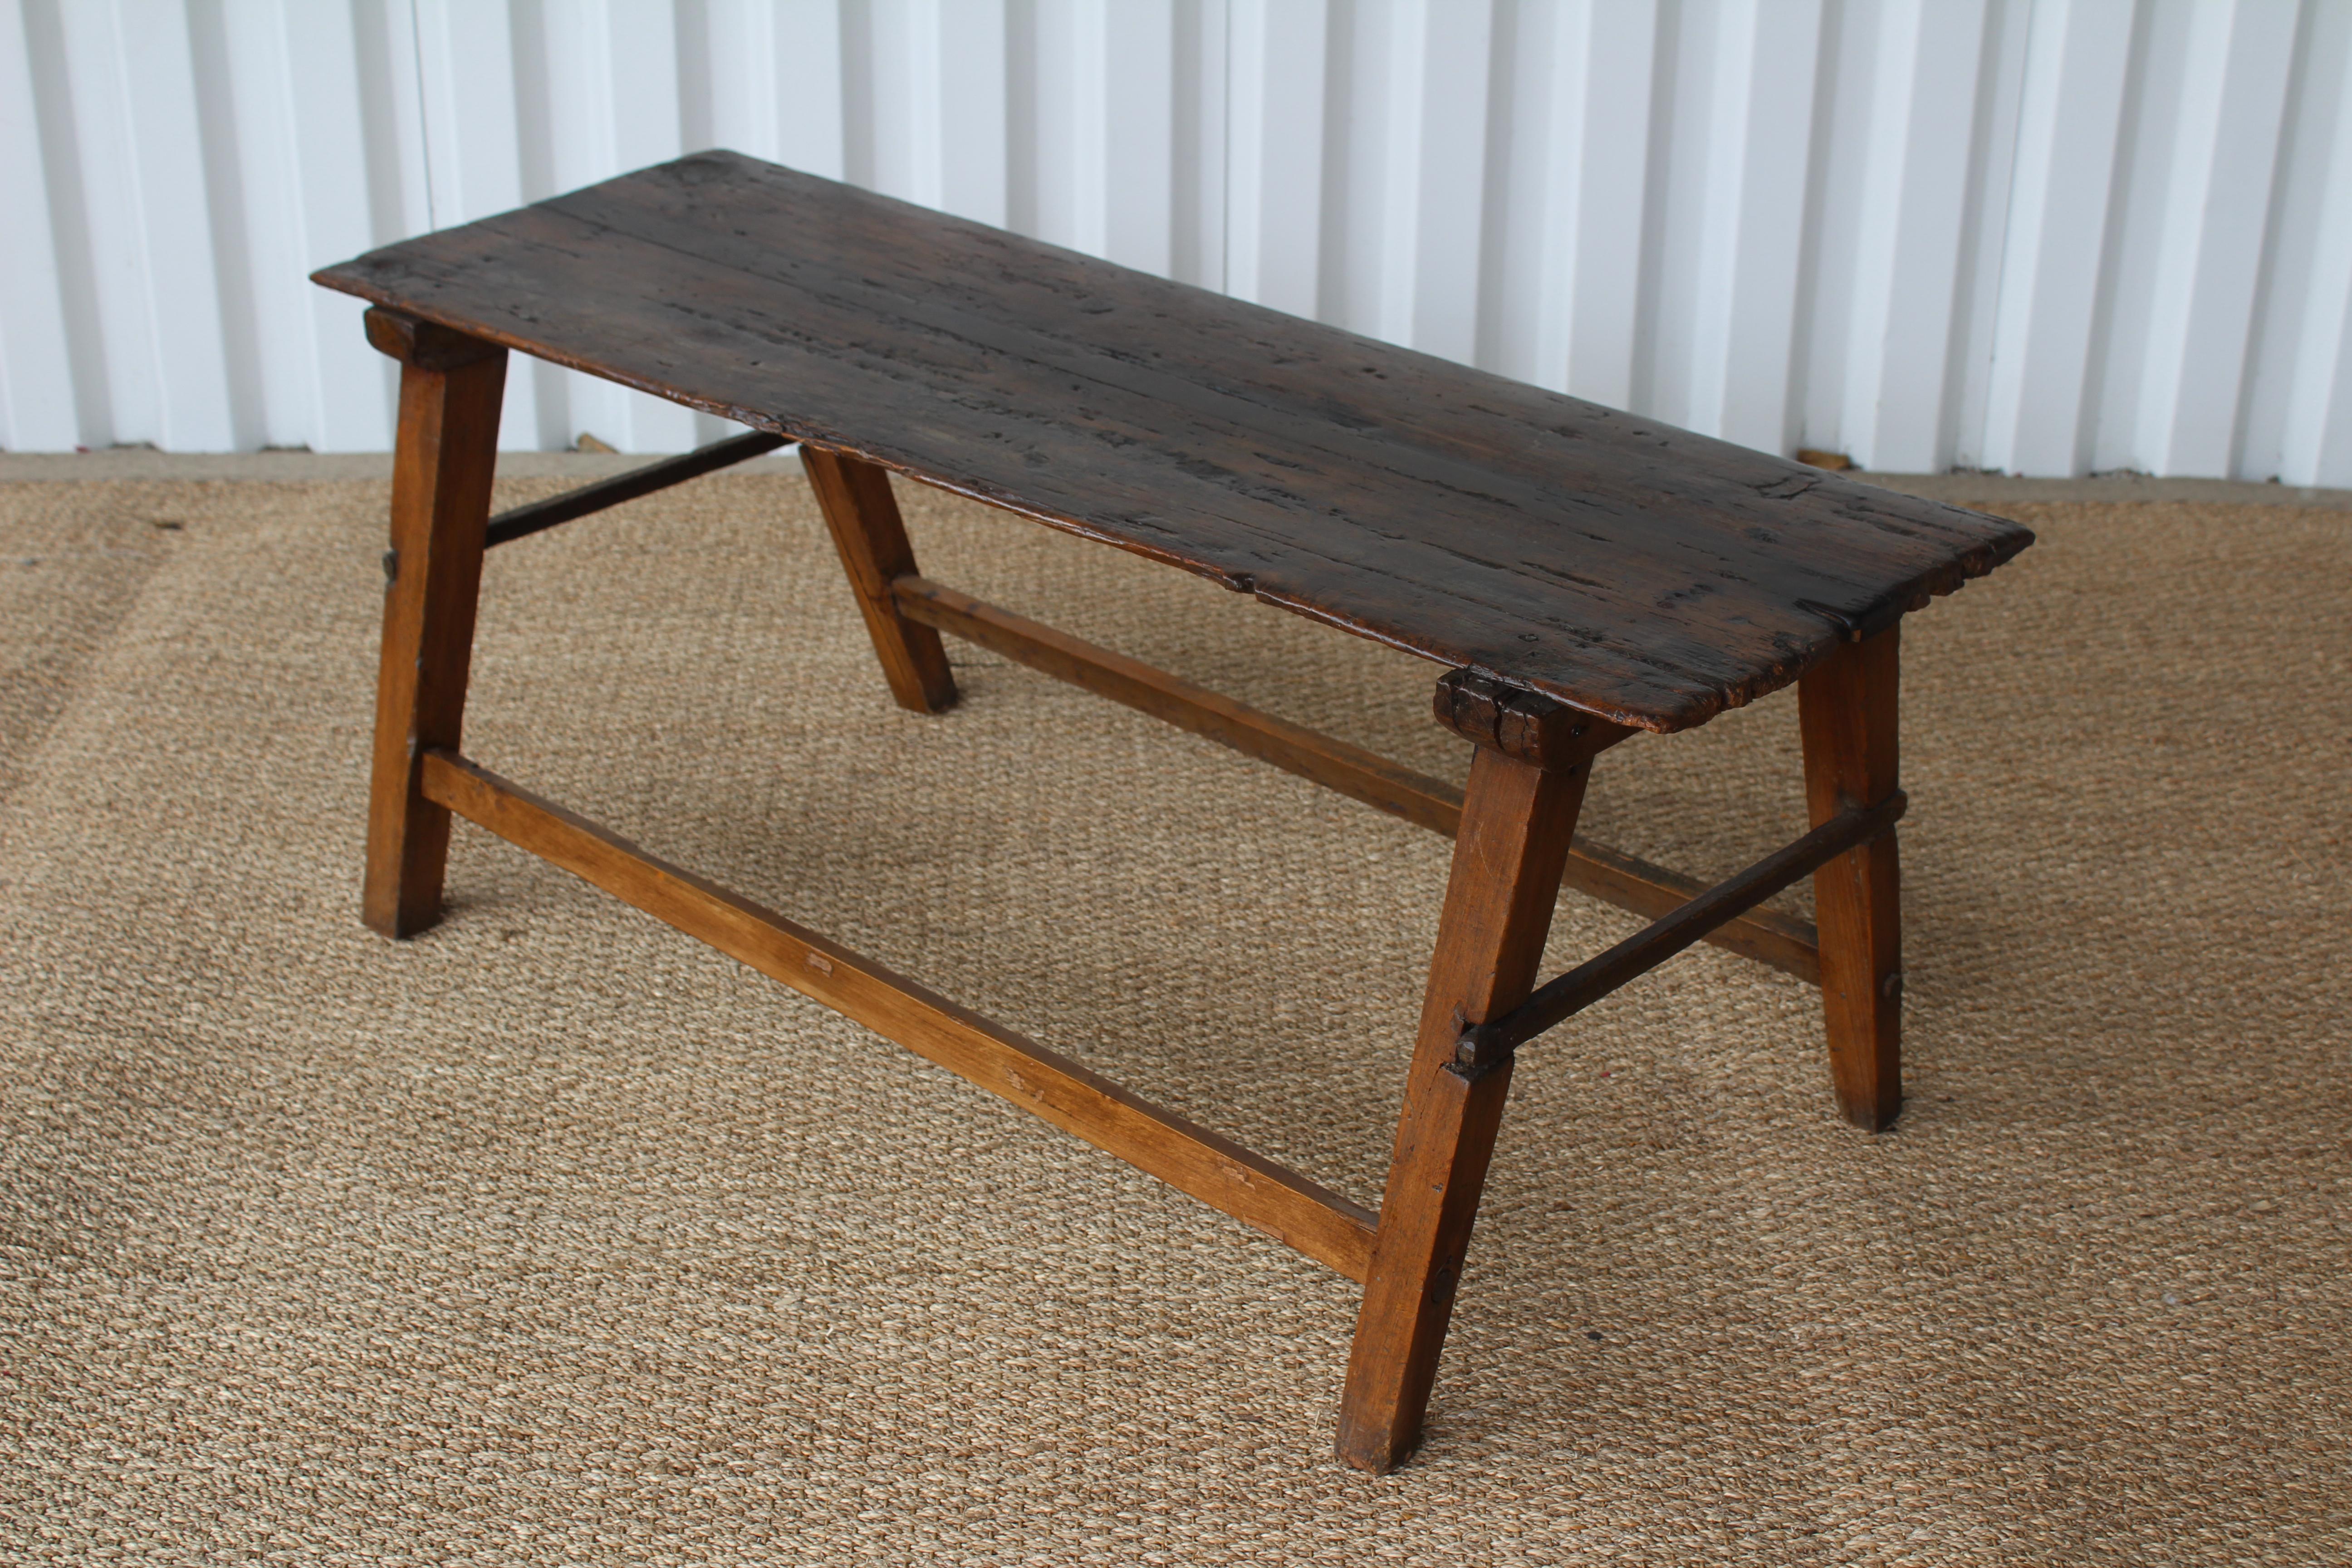 Antique rustic wood table. Age appropriate wear with minor losses.